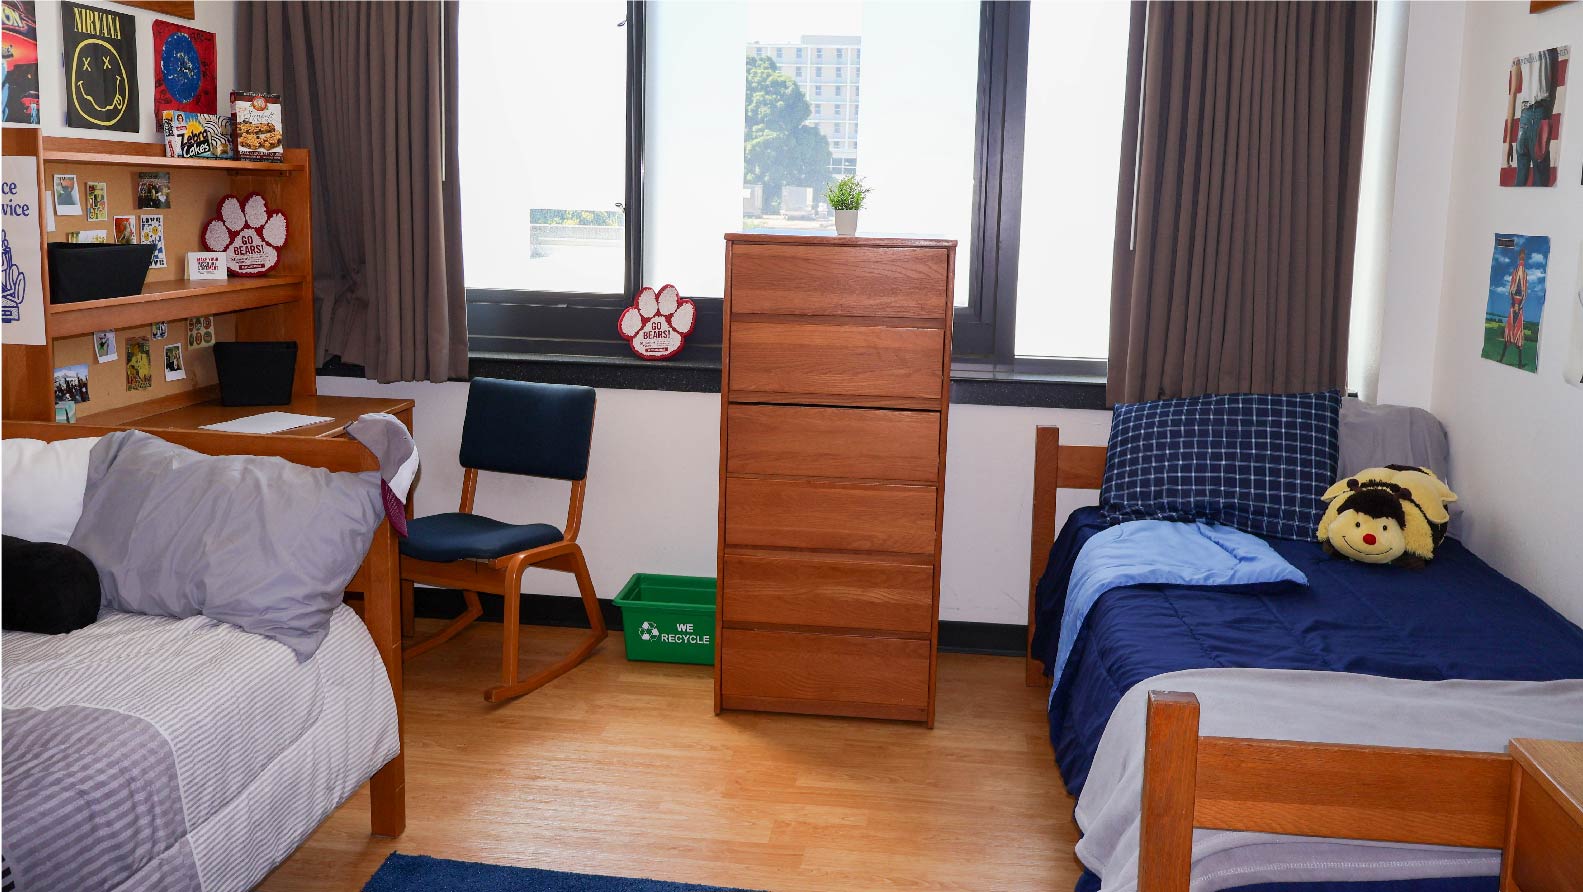 beds and chest of drawers